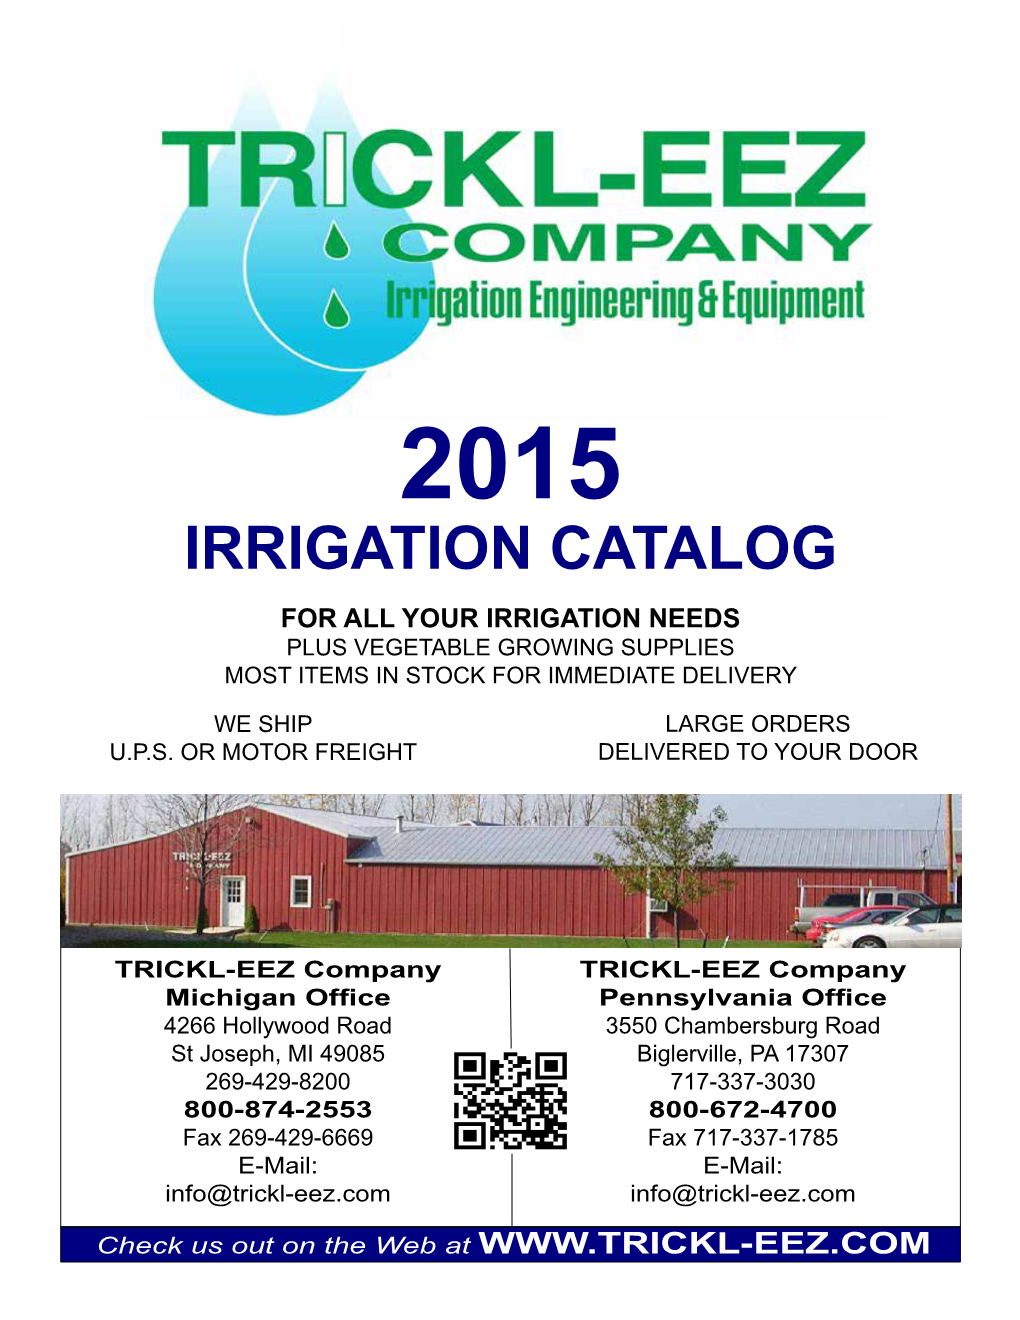 Irrigation Catalog for All Your Irrigation Needs Plus Vegetable Growing Supplies Most Items in Stock for Immediate Delivery